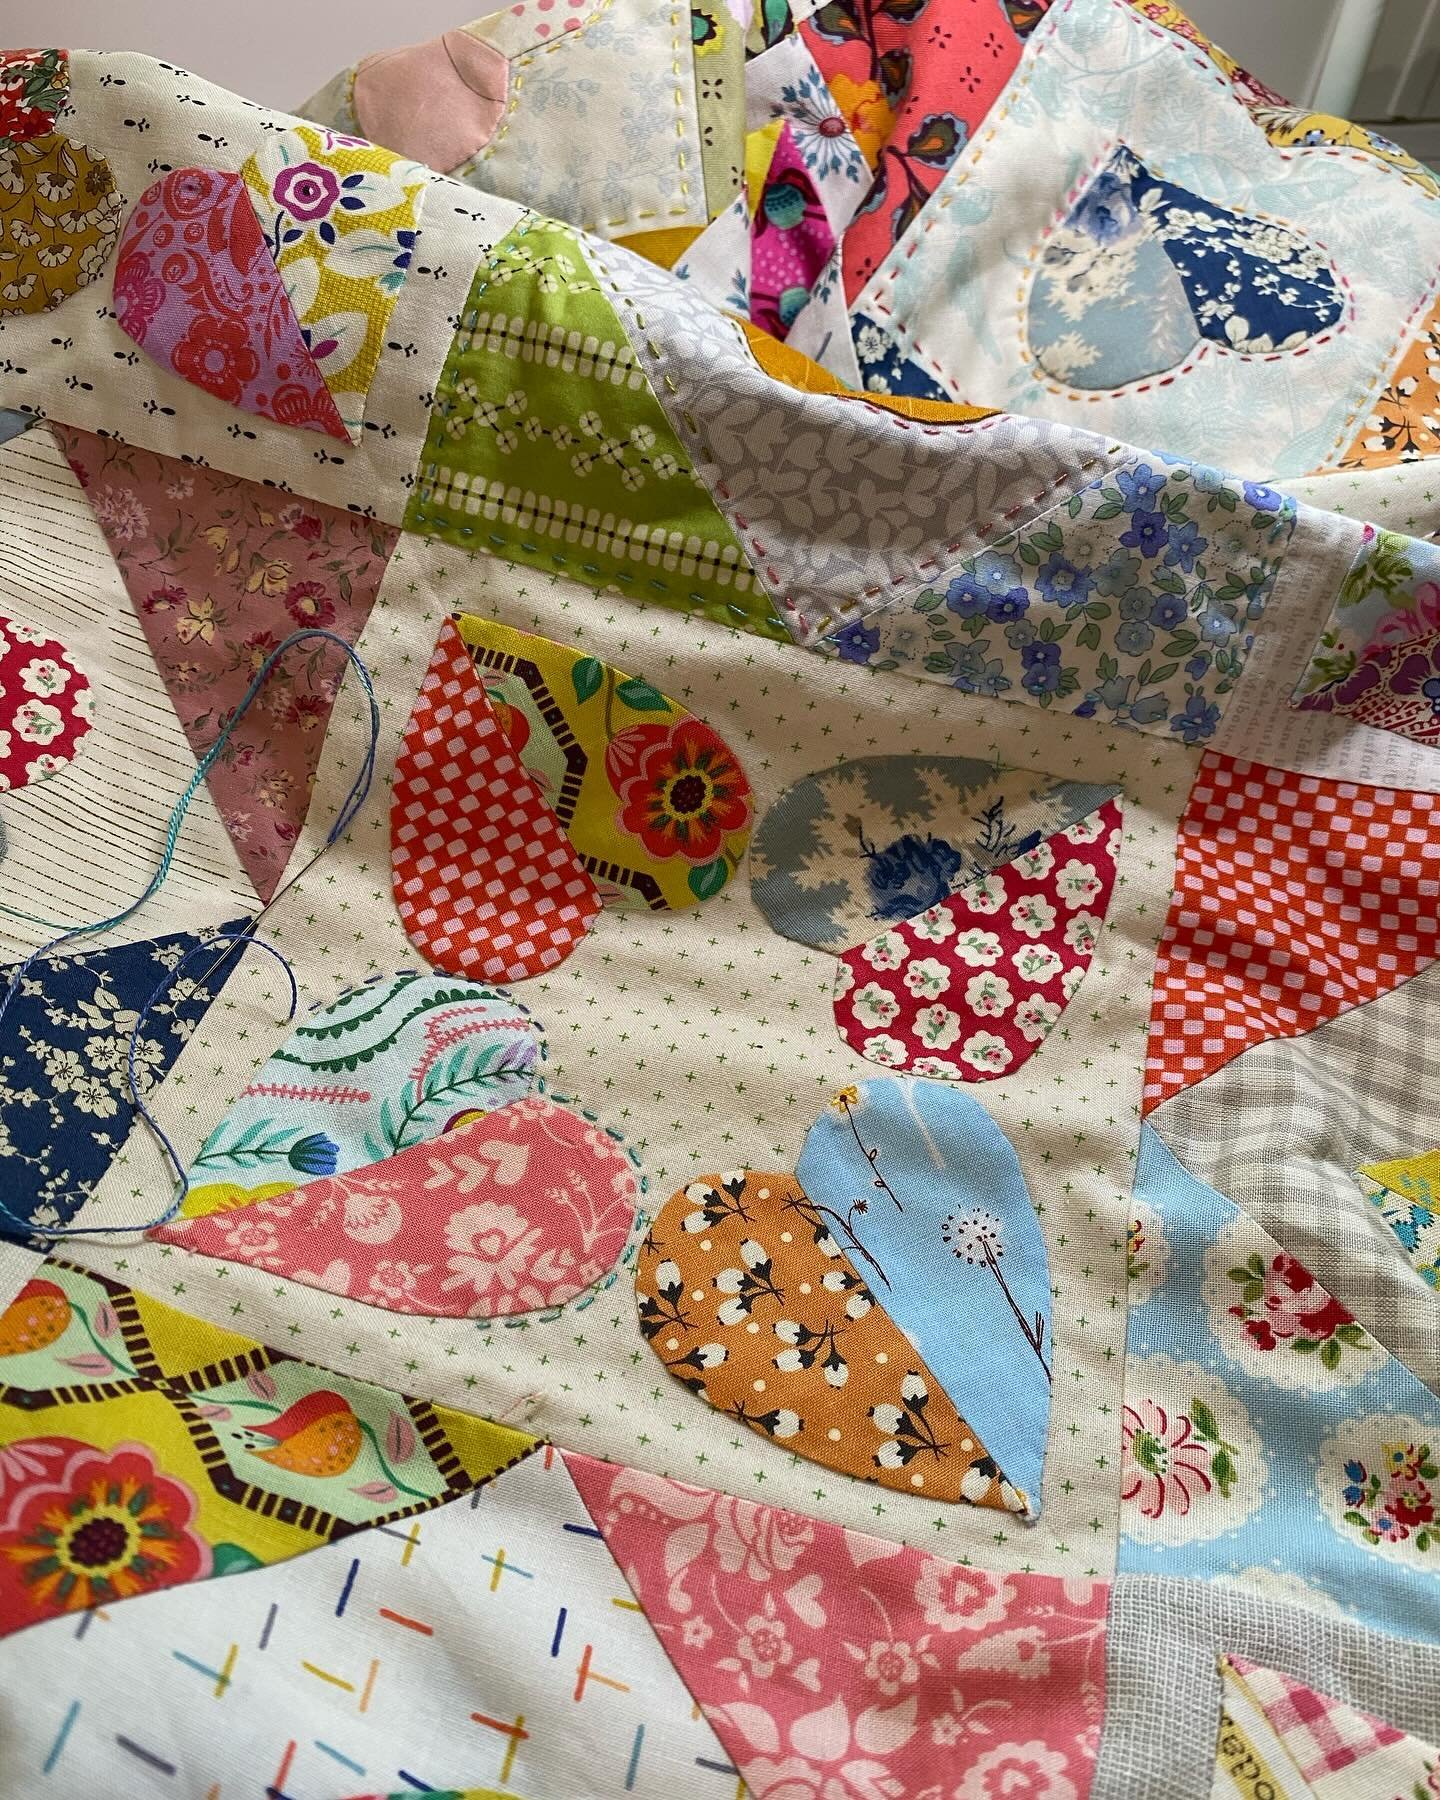 A little progress photo of what I have been working on recently, this sweet quilt will be part of the upcoming @makersbundles collaboration.

This is the first quilt in a little while that I am able to hand quilt, I love hand quilting and appliqu&eac